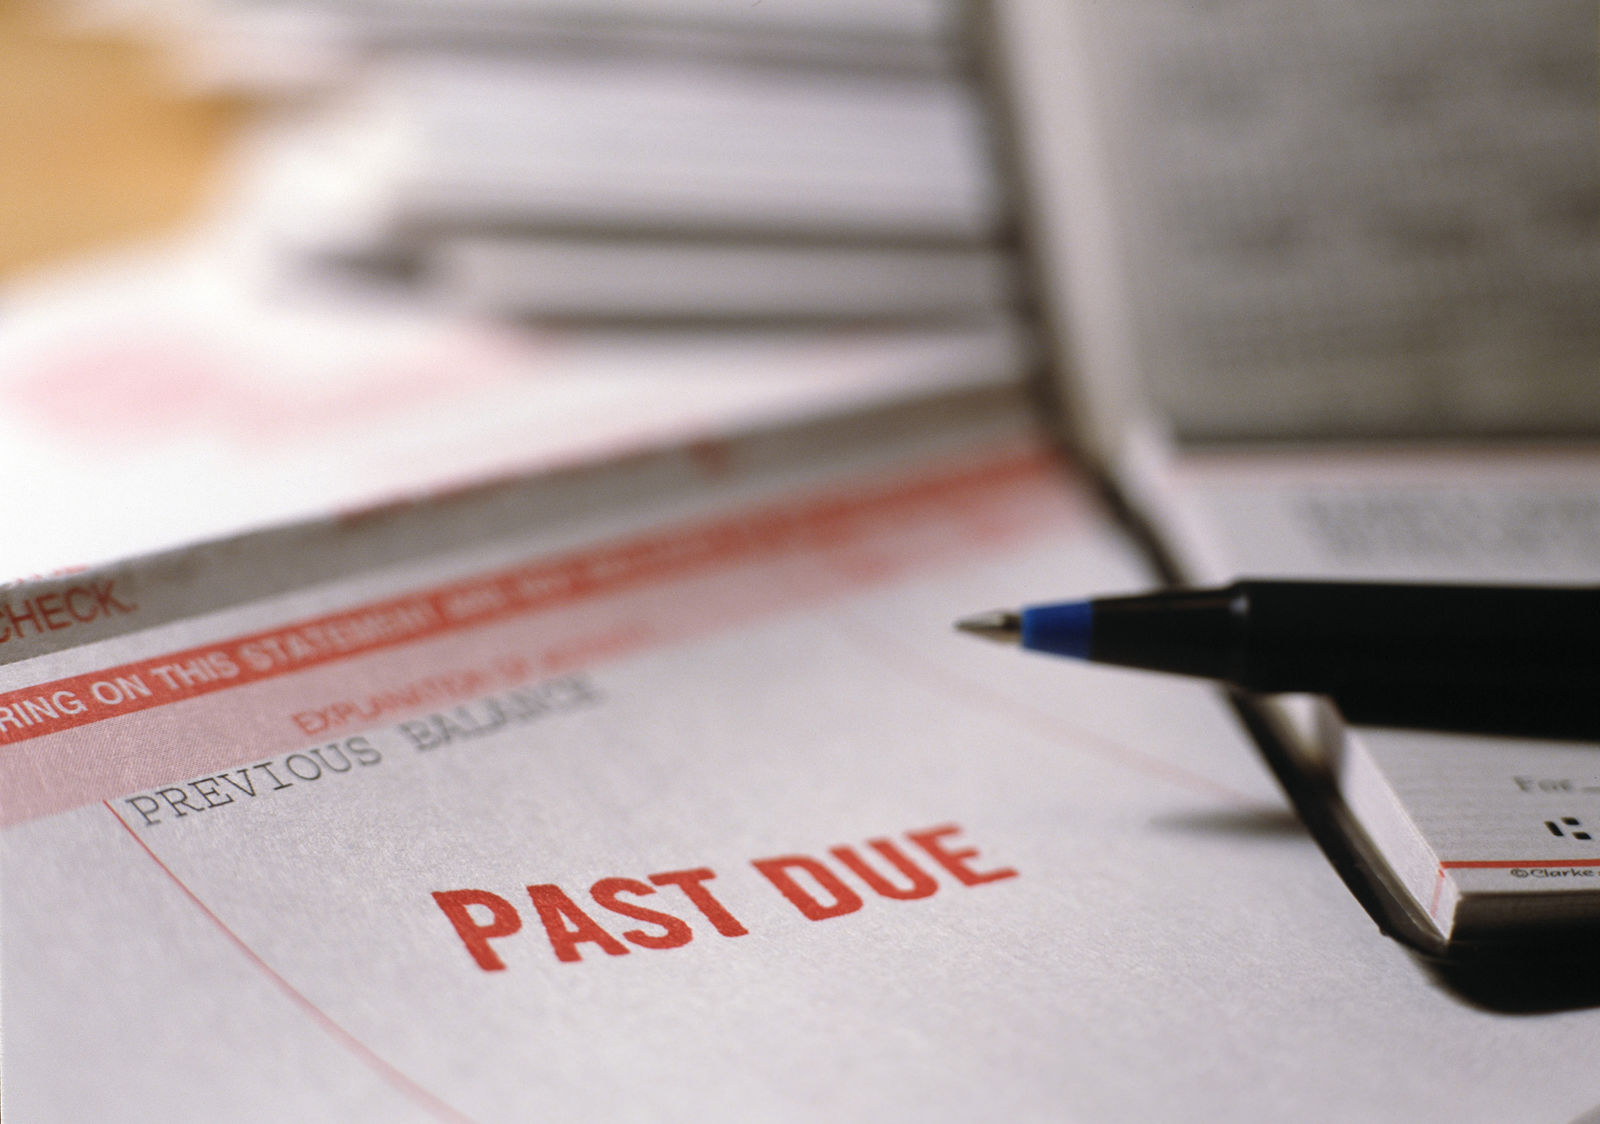 No matter how good you are at managing money, you've probably let a bill due date fall through the cracks, at least once. Here are some ways to minimize the damage. (Thinkstock)